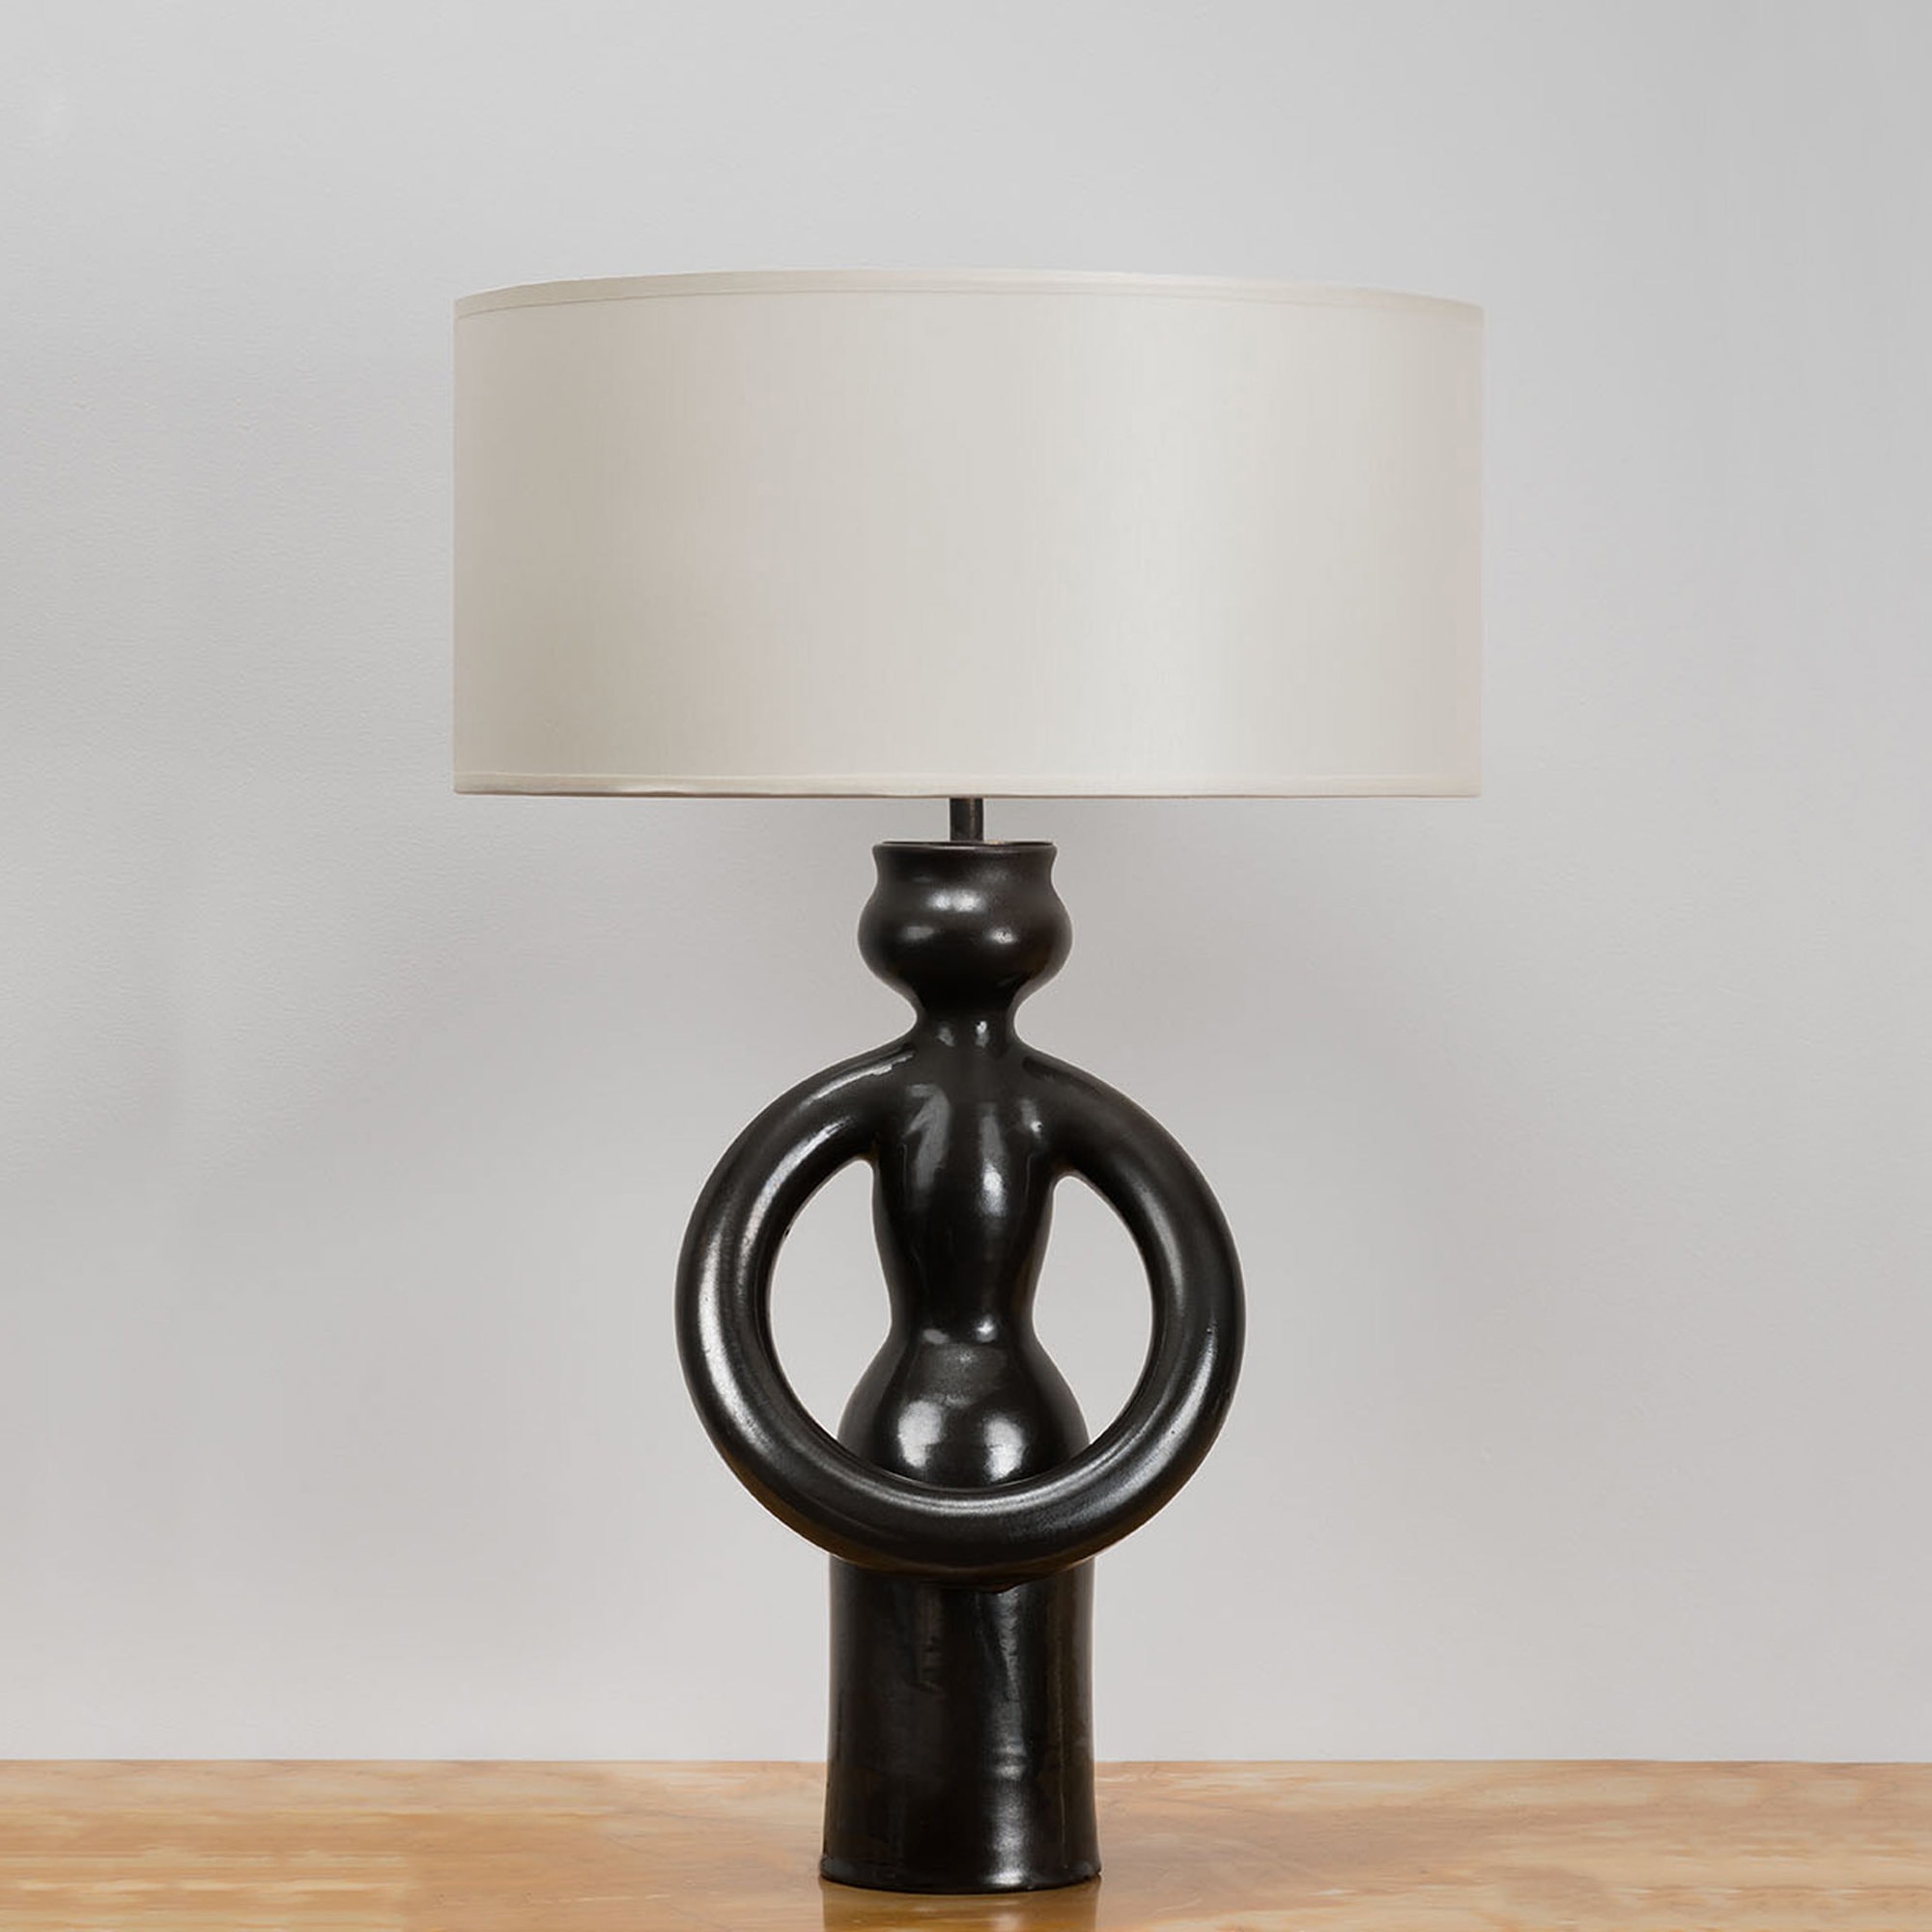 Atelier Madoura – Suzanne Ramie, Table lamp (sold), vue 01